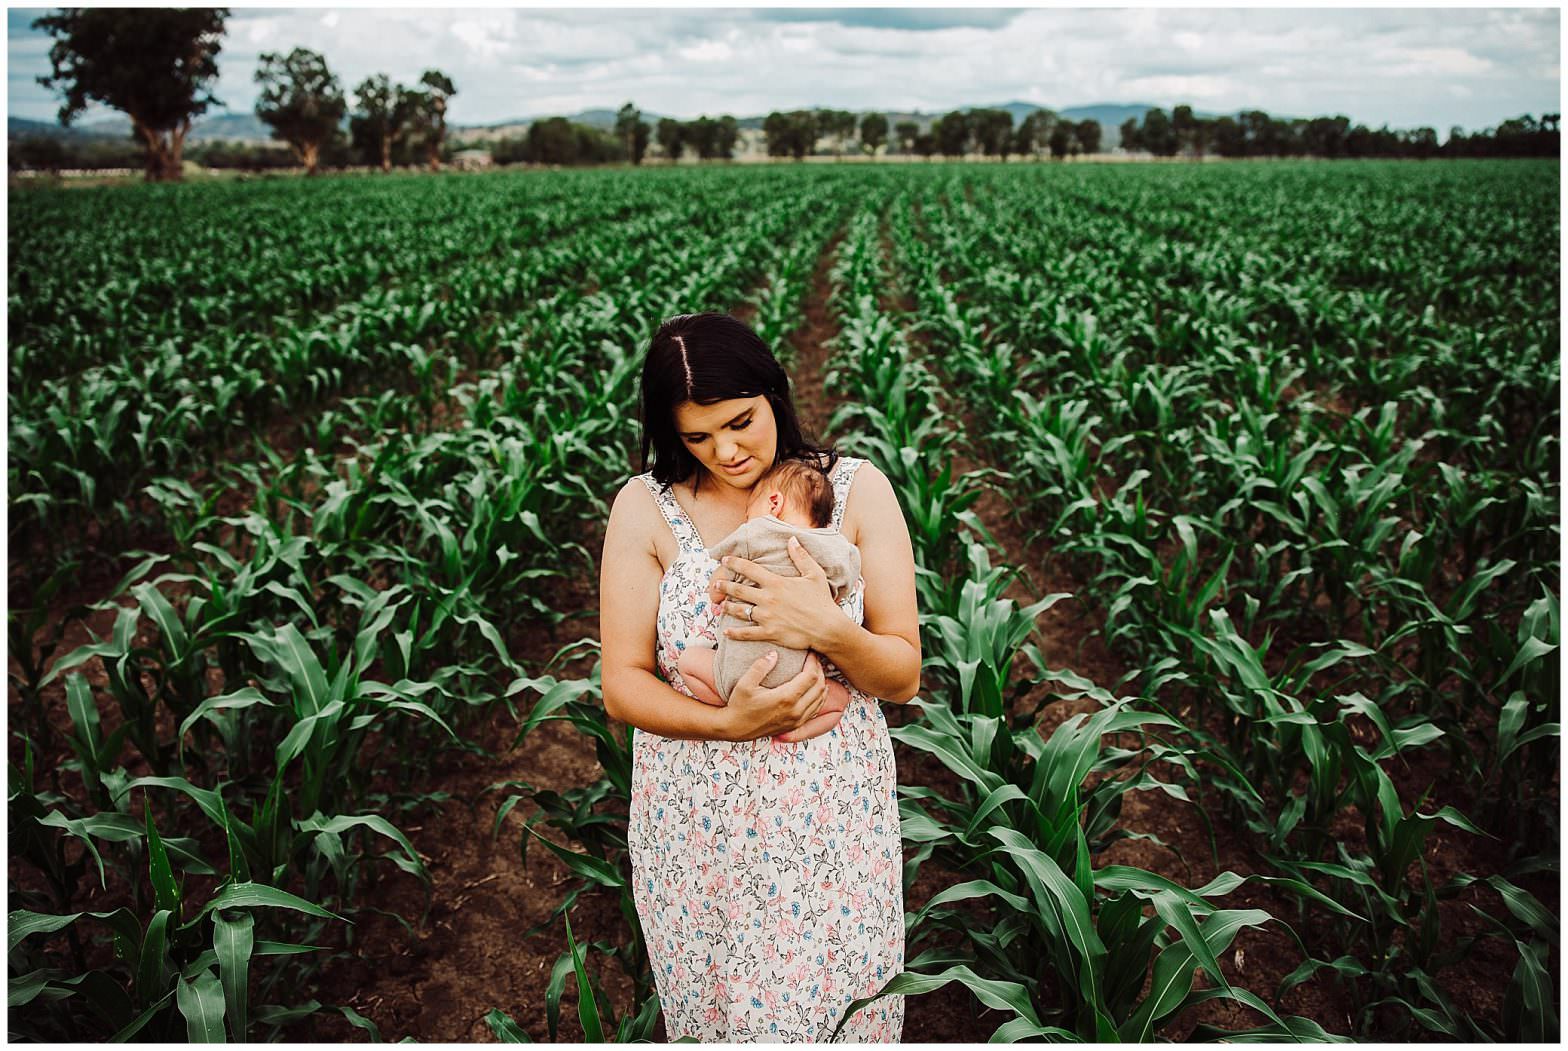 rows of green corn is the backdrop near Tamworth for family shoot as mother holds her week old baby as she looks down at her baby. She is wearing a floral dress